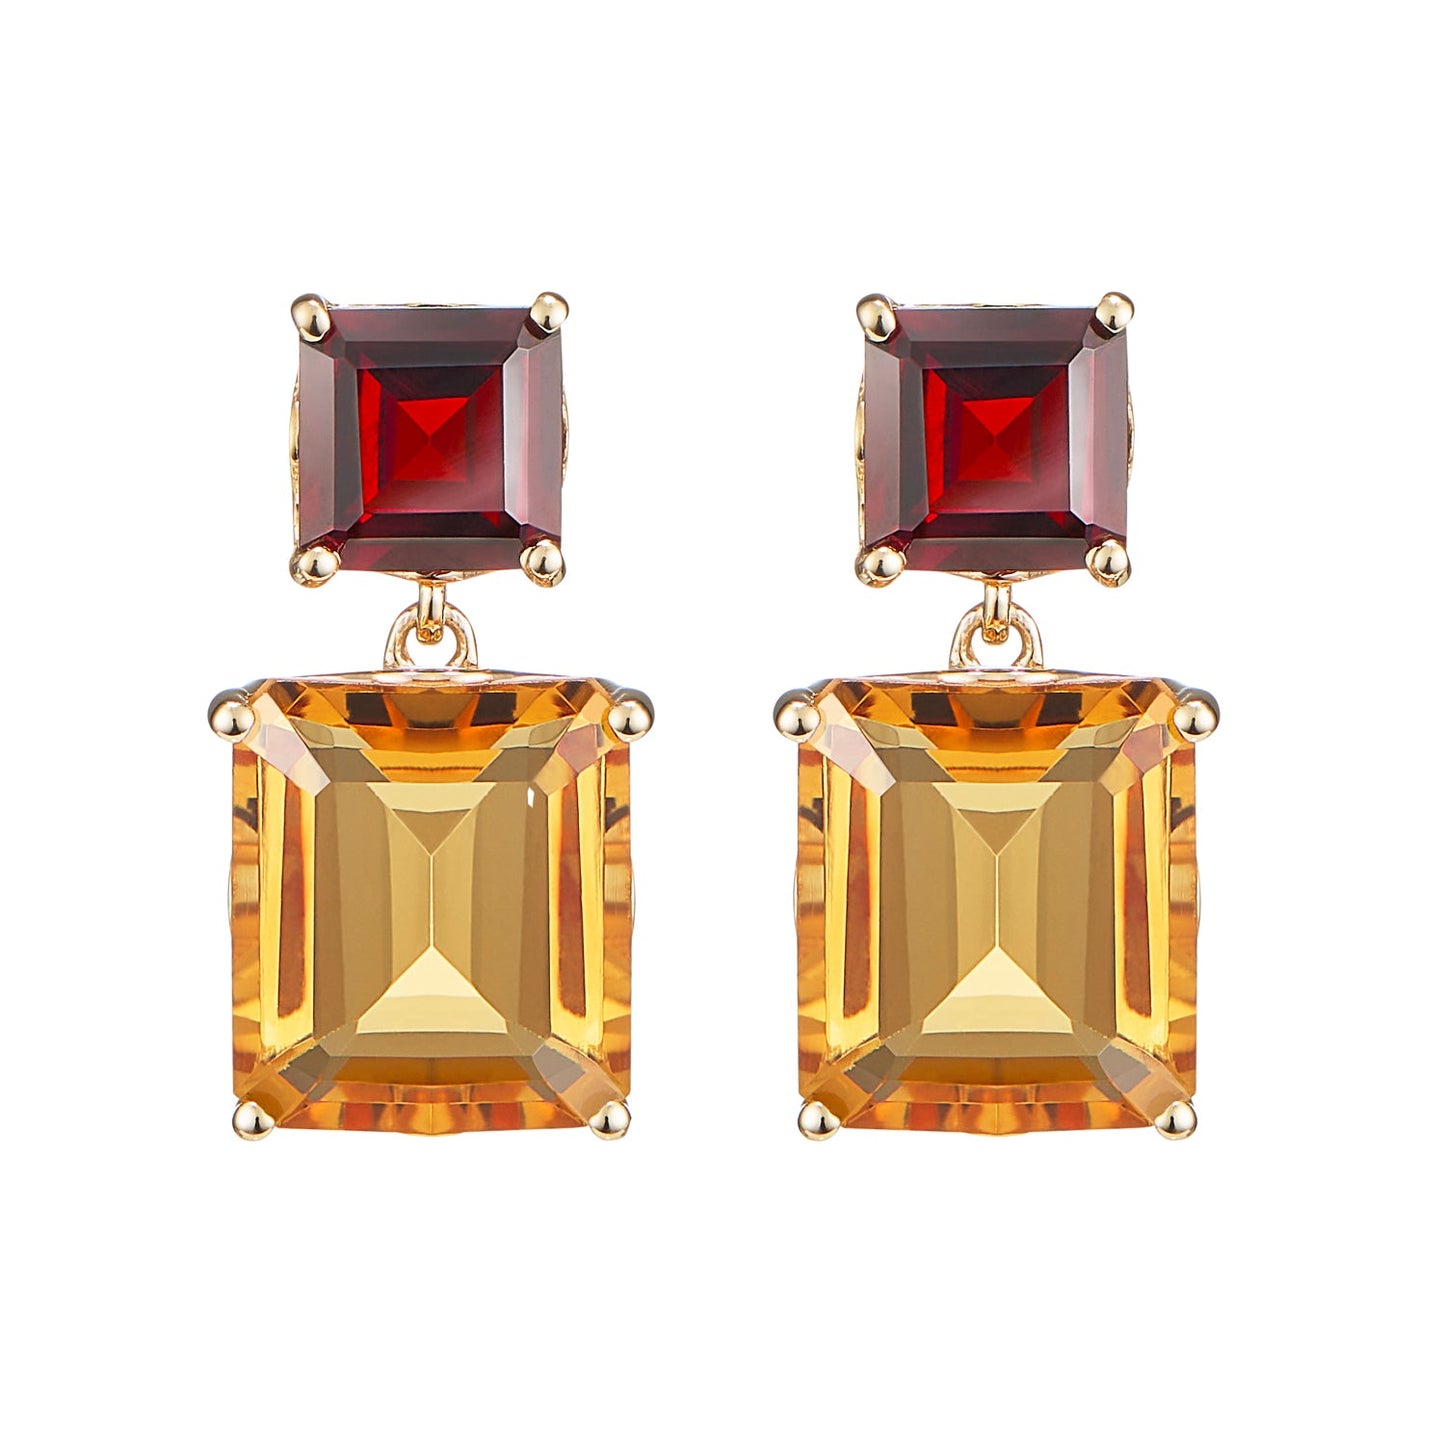 London-made luxury custom gold jewellery -9ct Yellow Gold Octagon Gold Drop Earrings in Garnet and Citrine – Andalusian Collection, Augustine Jewellery, British Jewellers, Gemstone Jewellery, Luxury Jewellery London.